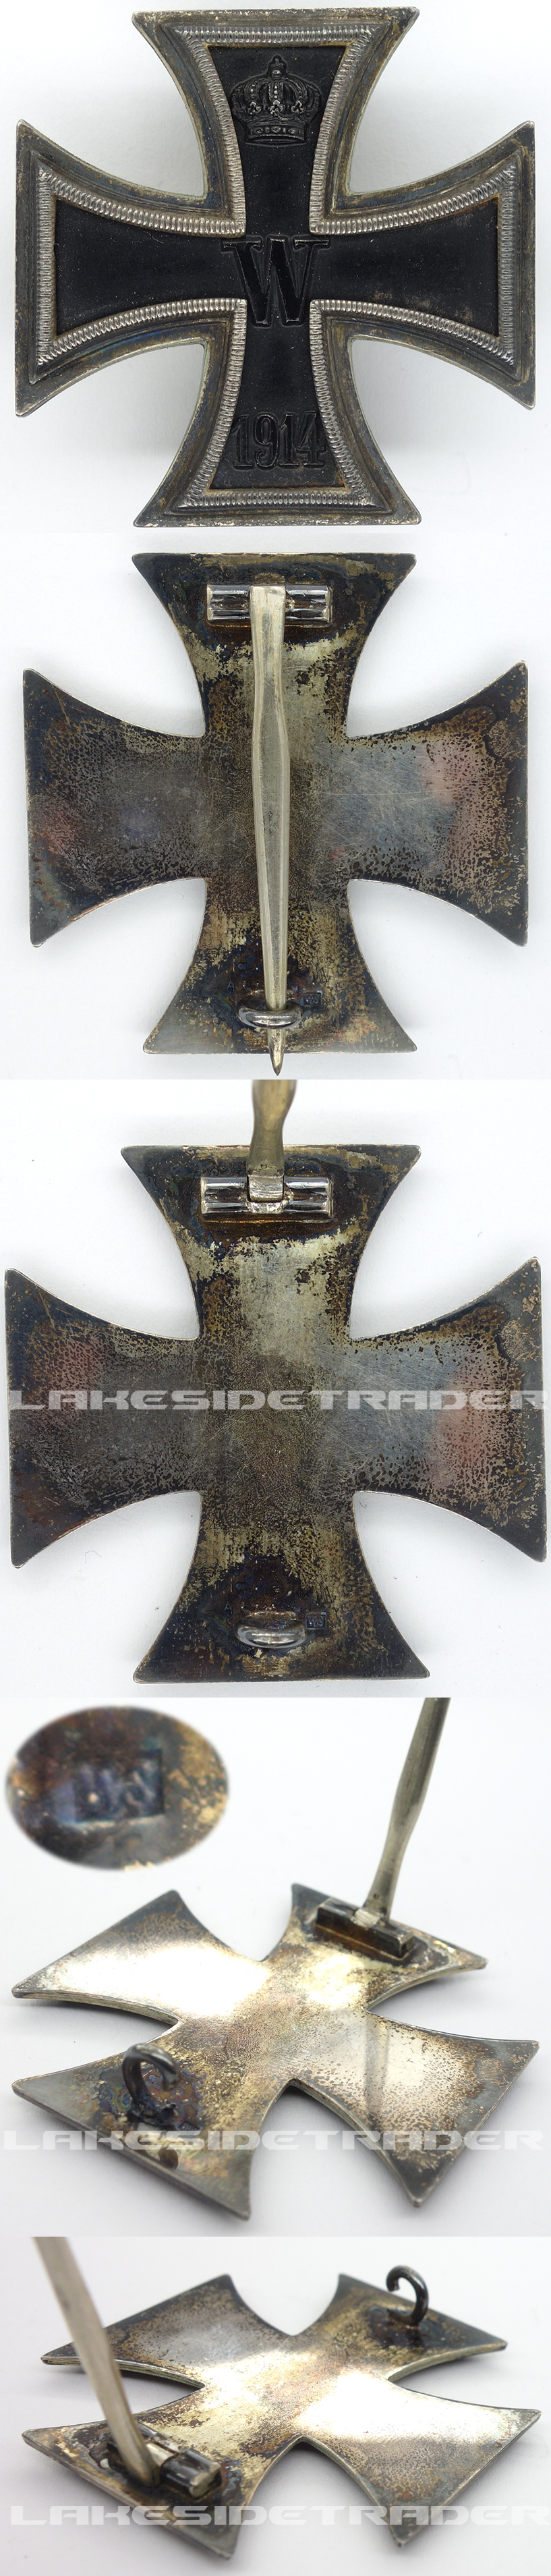 Boxed & Cased Imperial 1st Class Iron Cross by WS